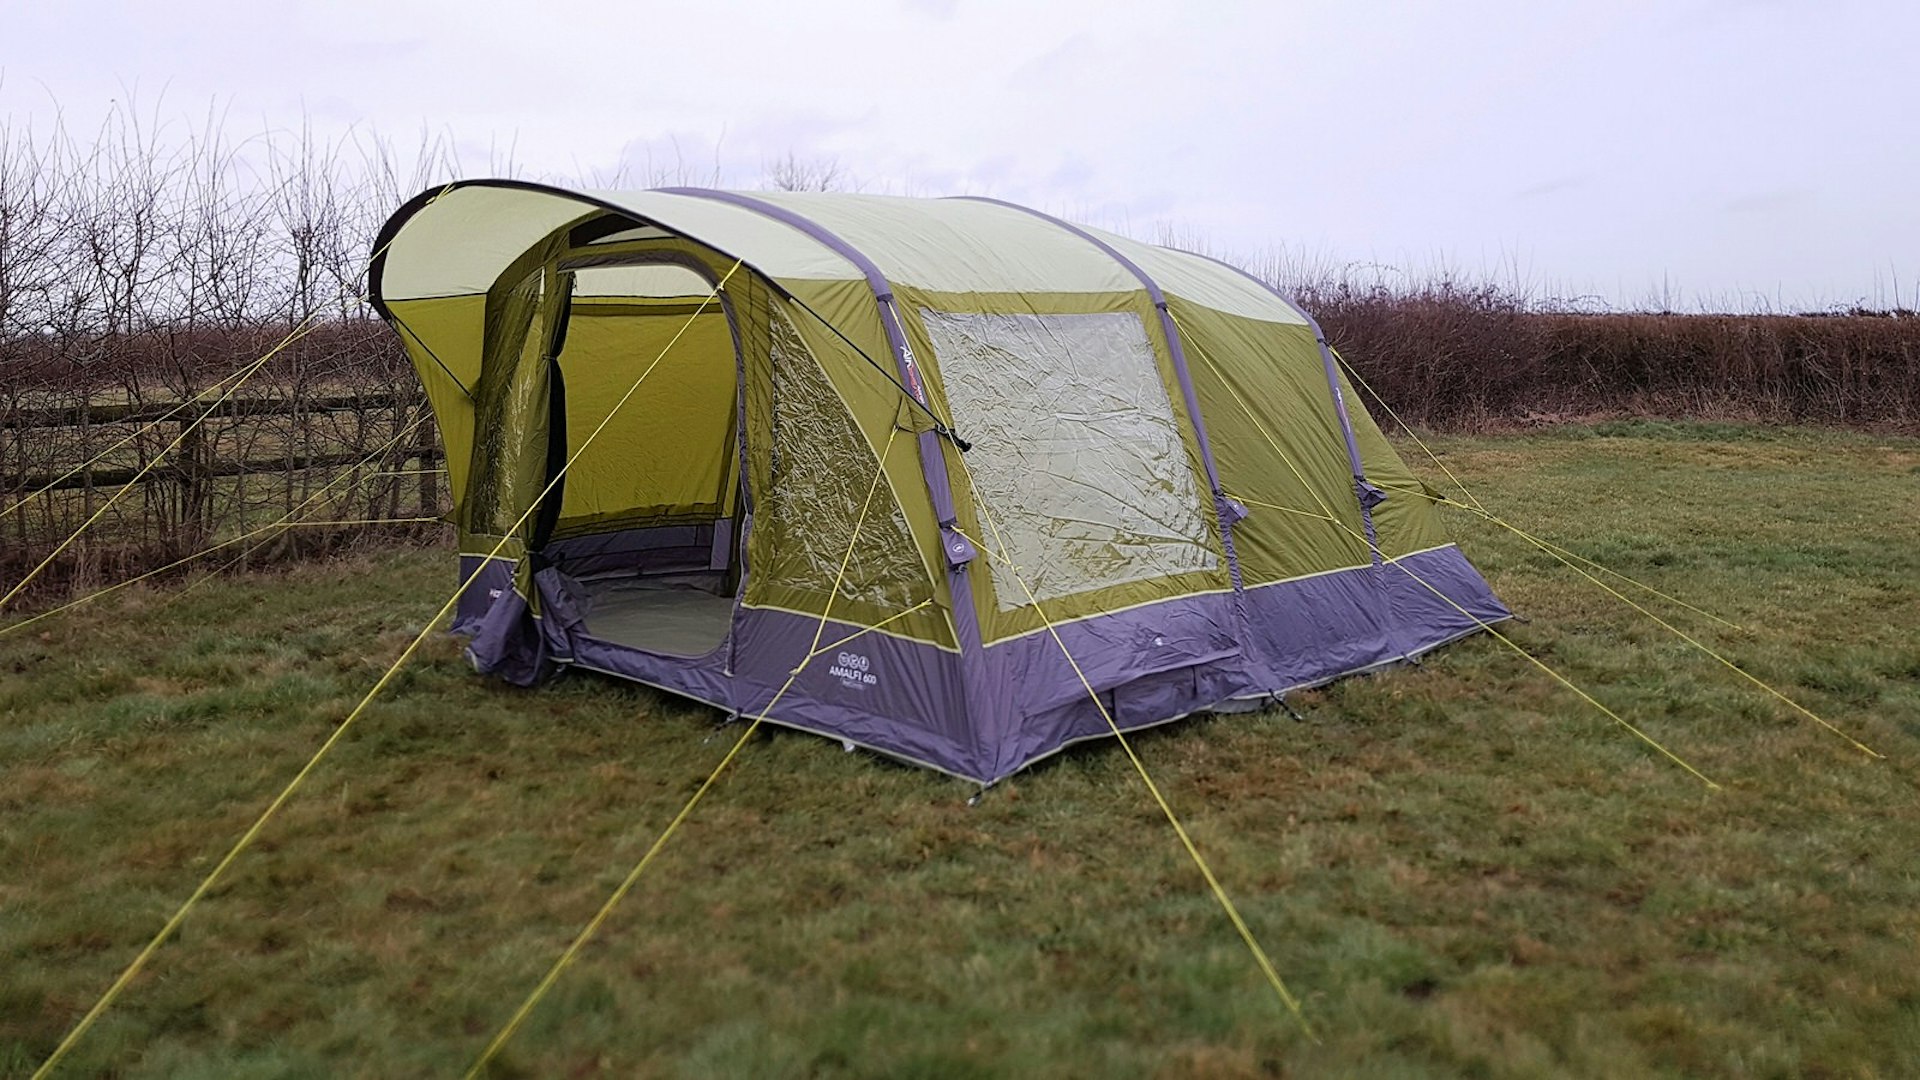 Vango Amalfi Air 600 tent pitched in a field